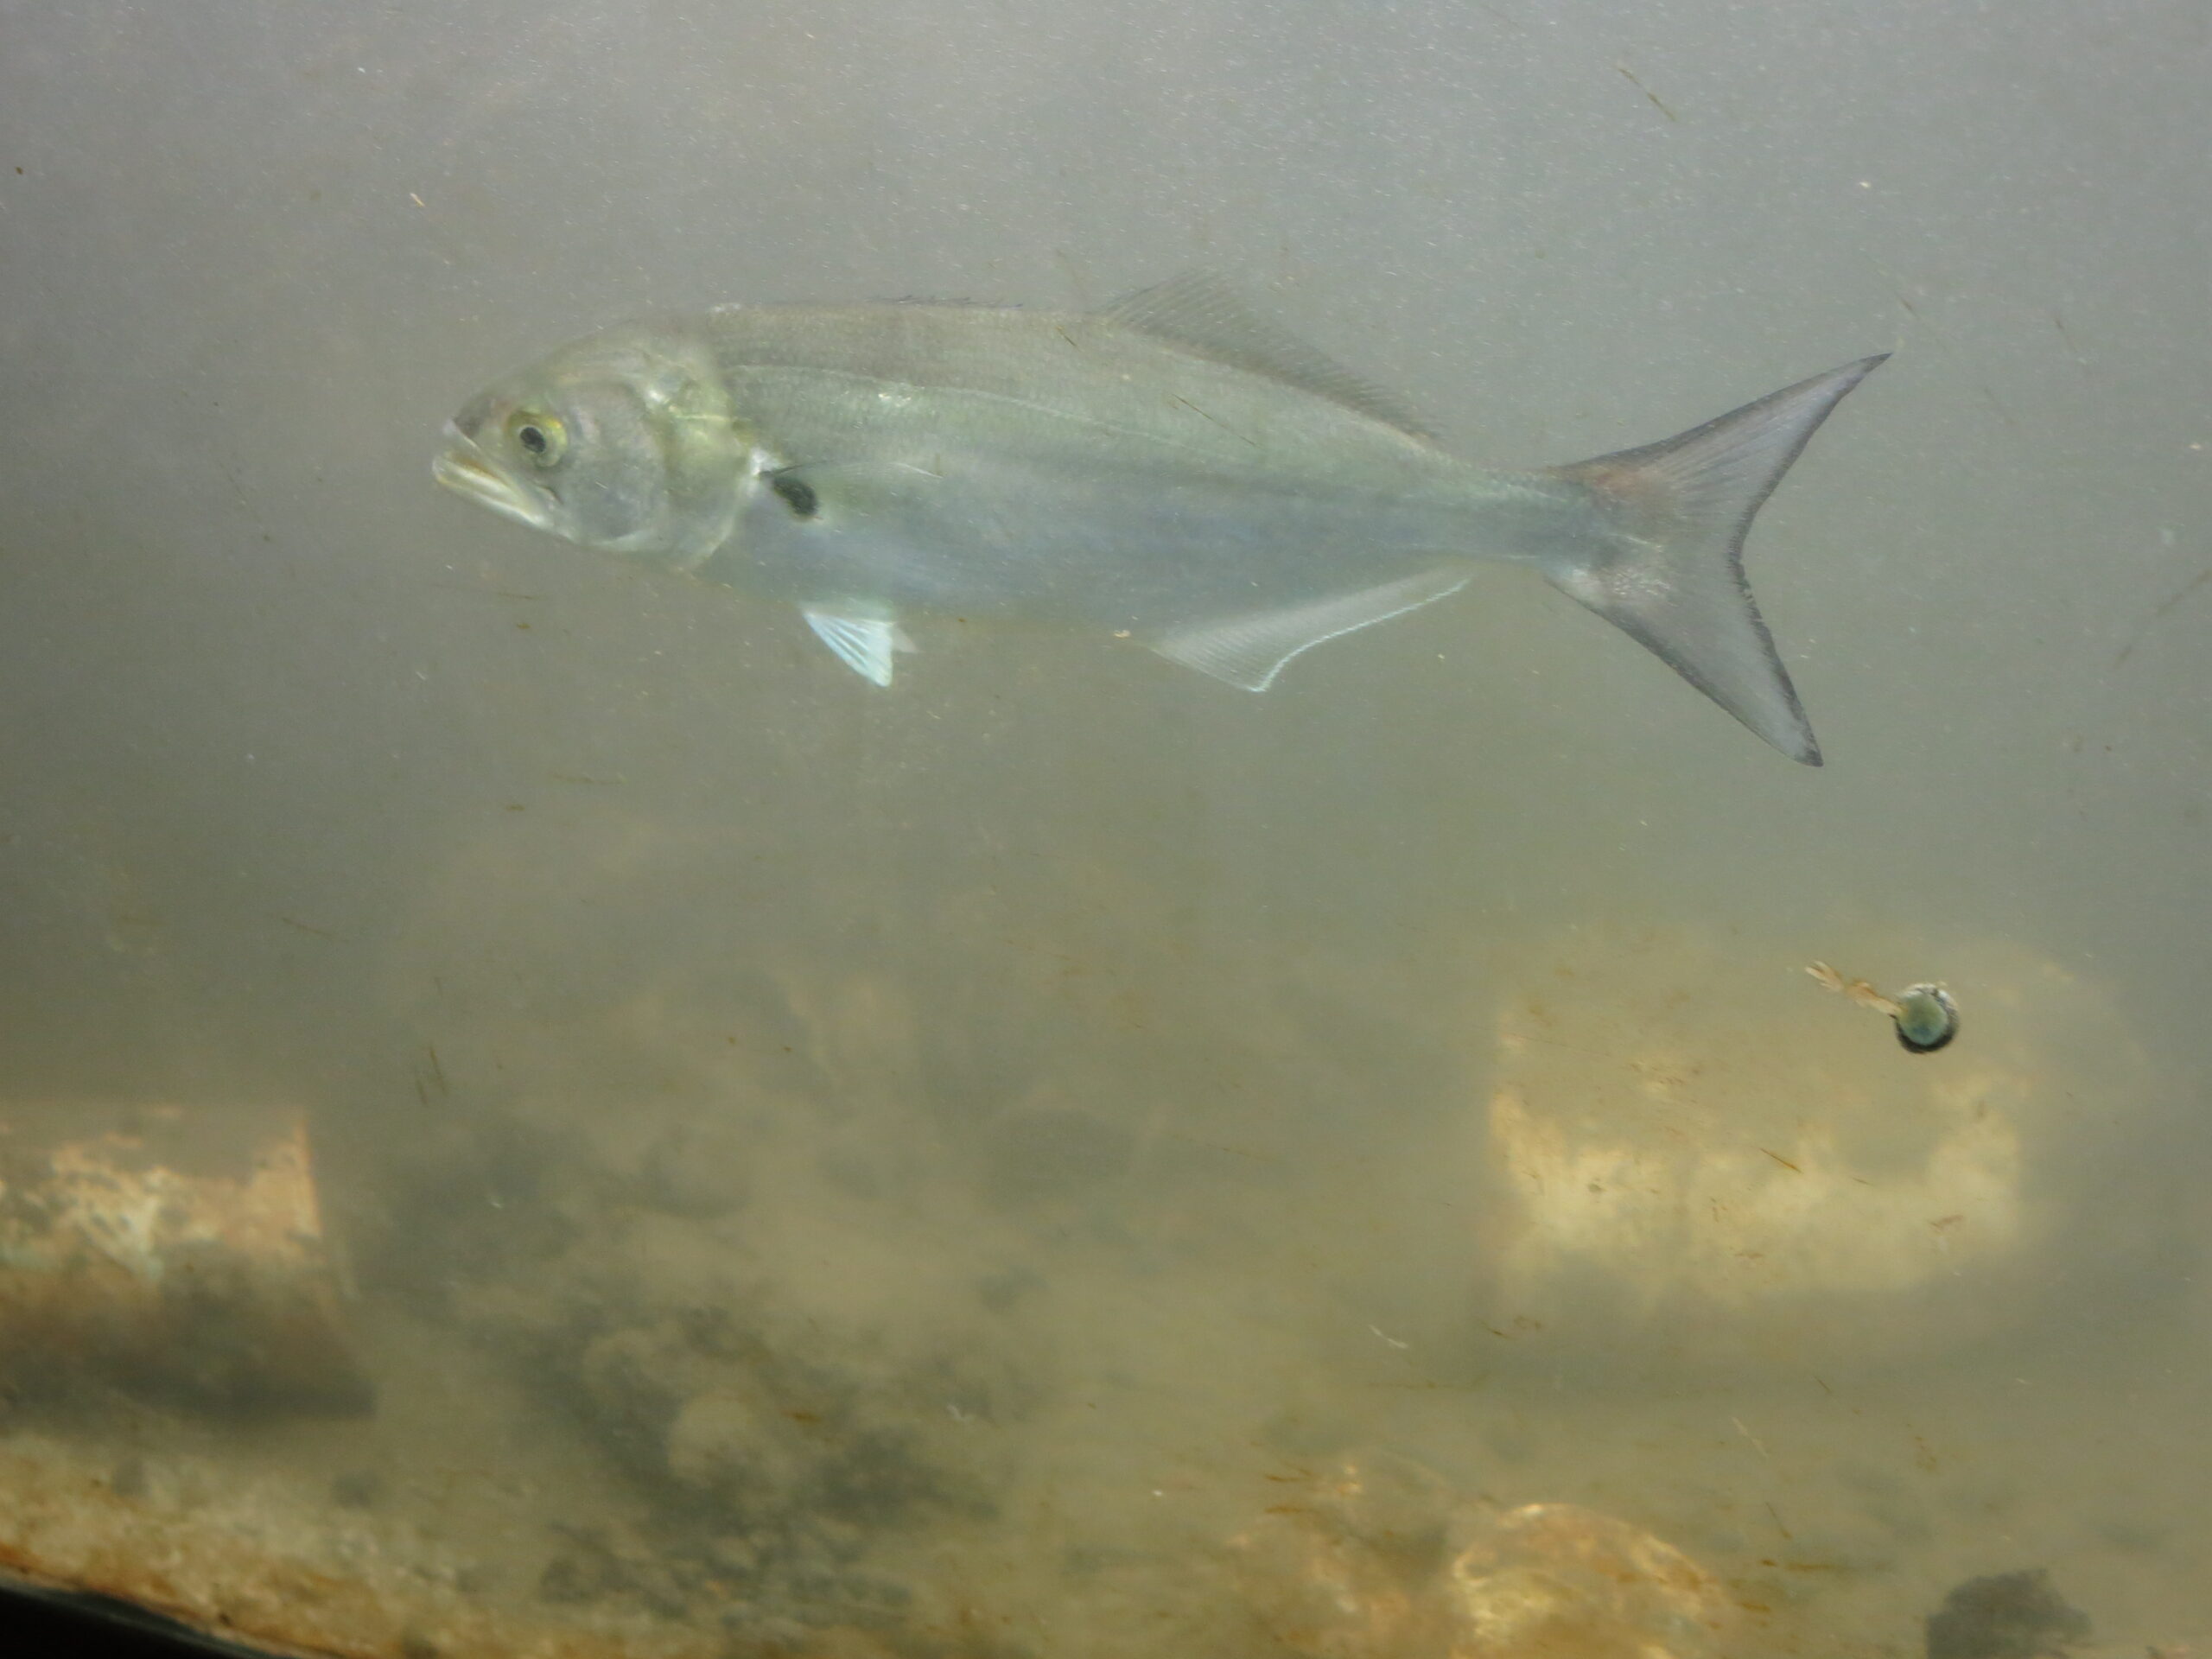 A bluefish swimming by the camera